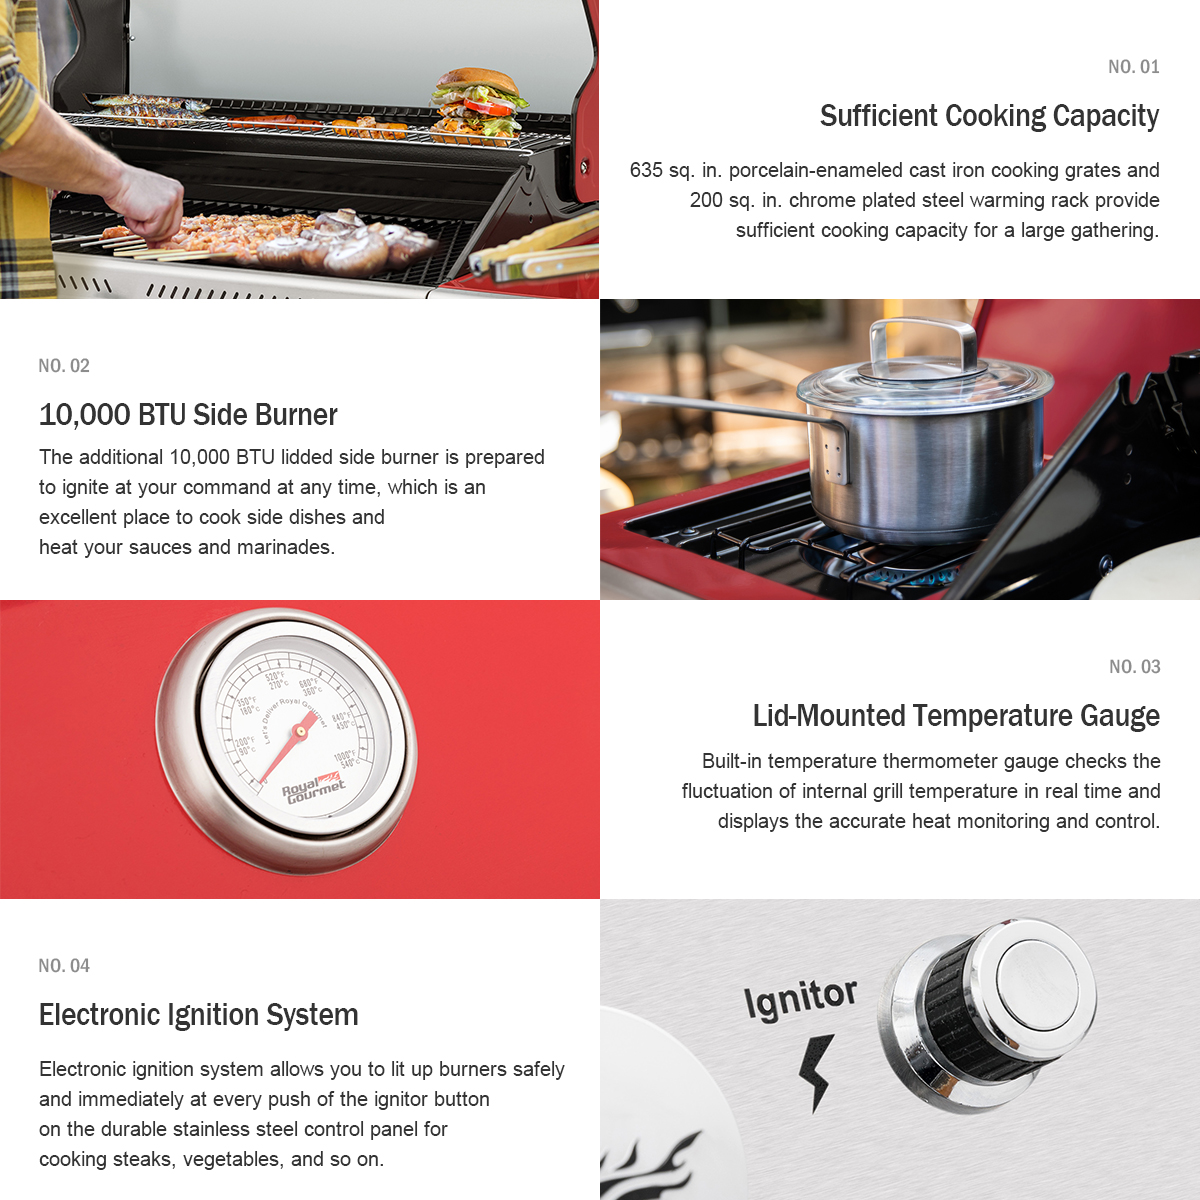 Universal 3 Grill Temperature Gauge | Char-Broil®